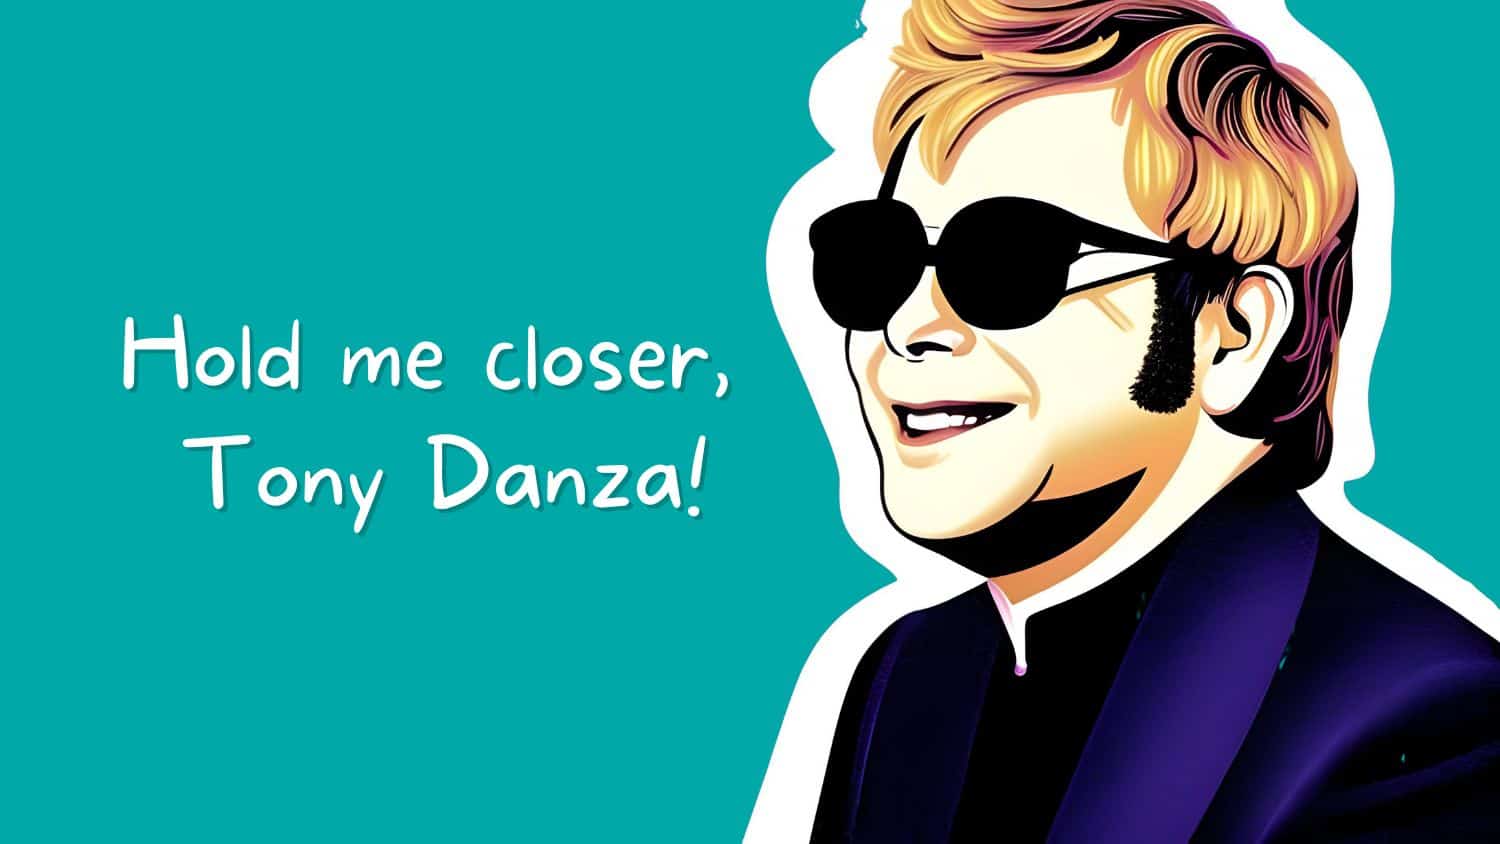 Drawing of Elton John and a misheard lyric from his song Tiny Dancer